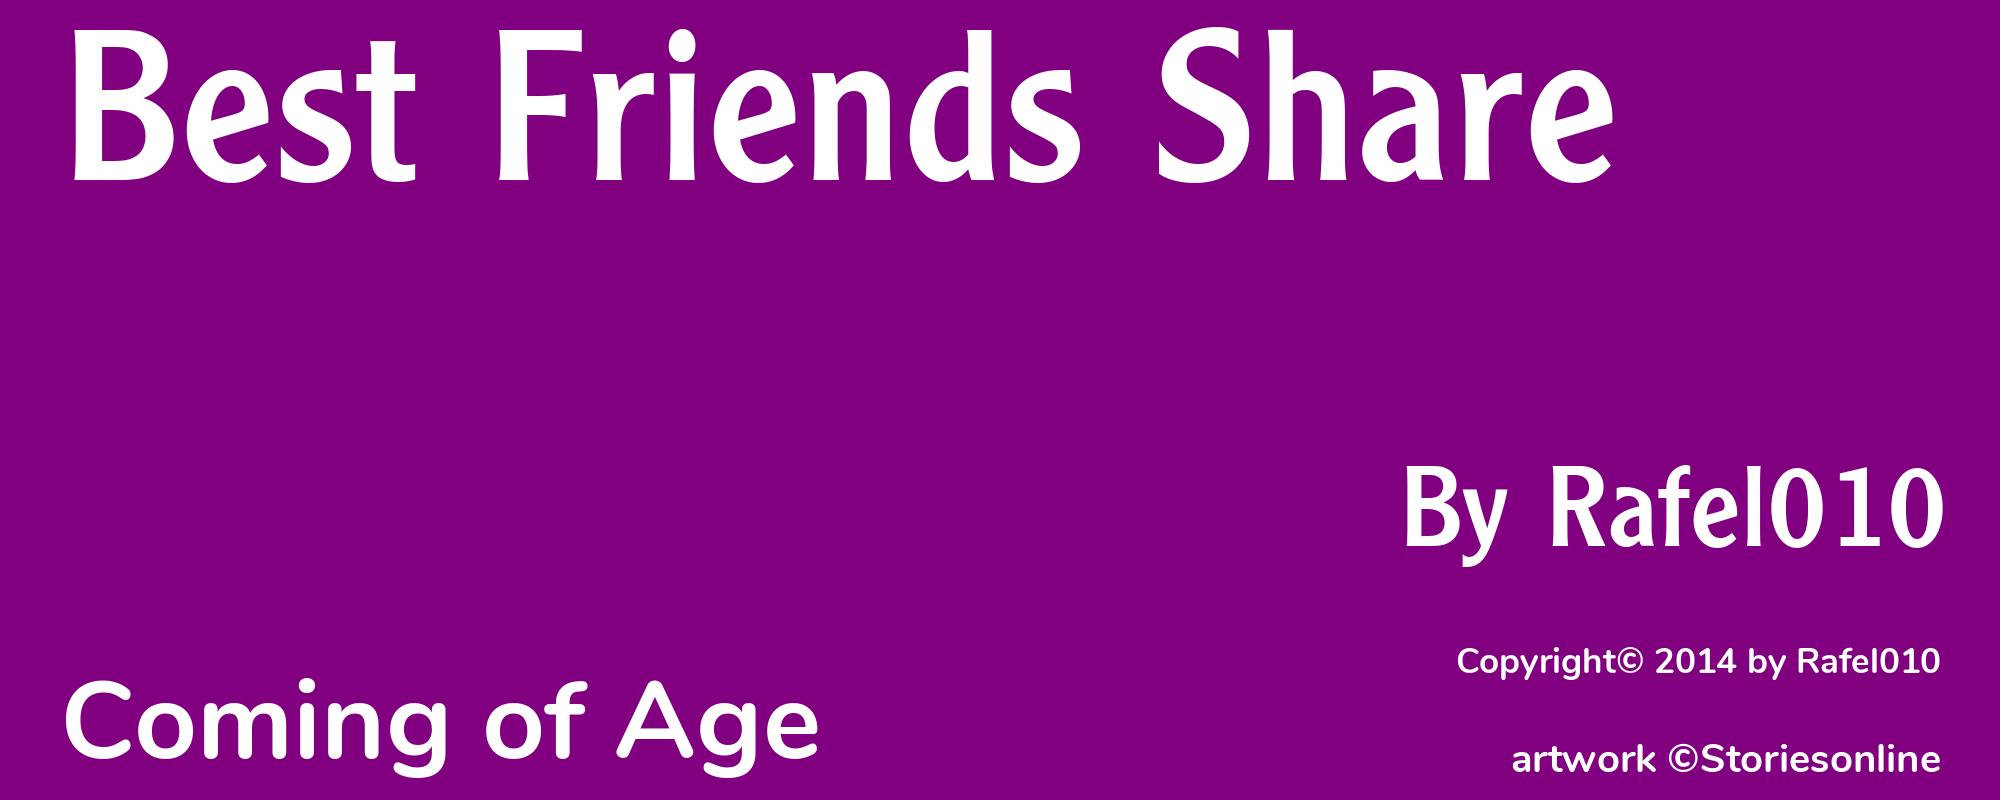 Best Friends Share - Cover